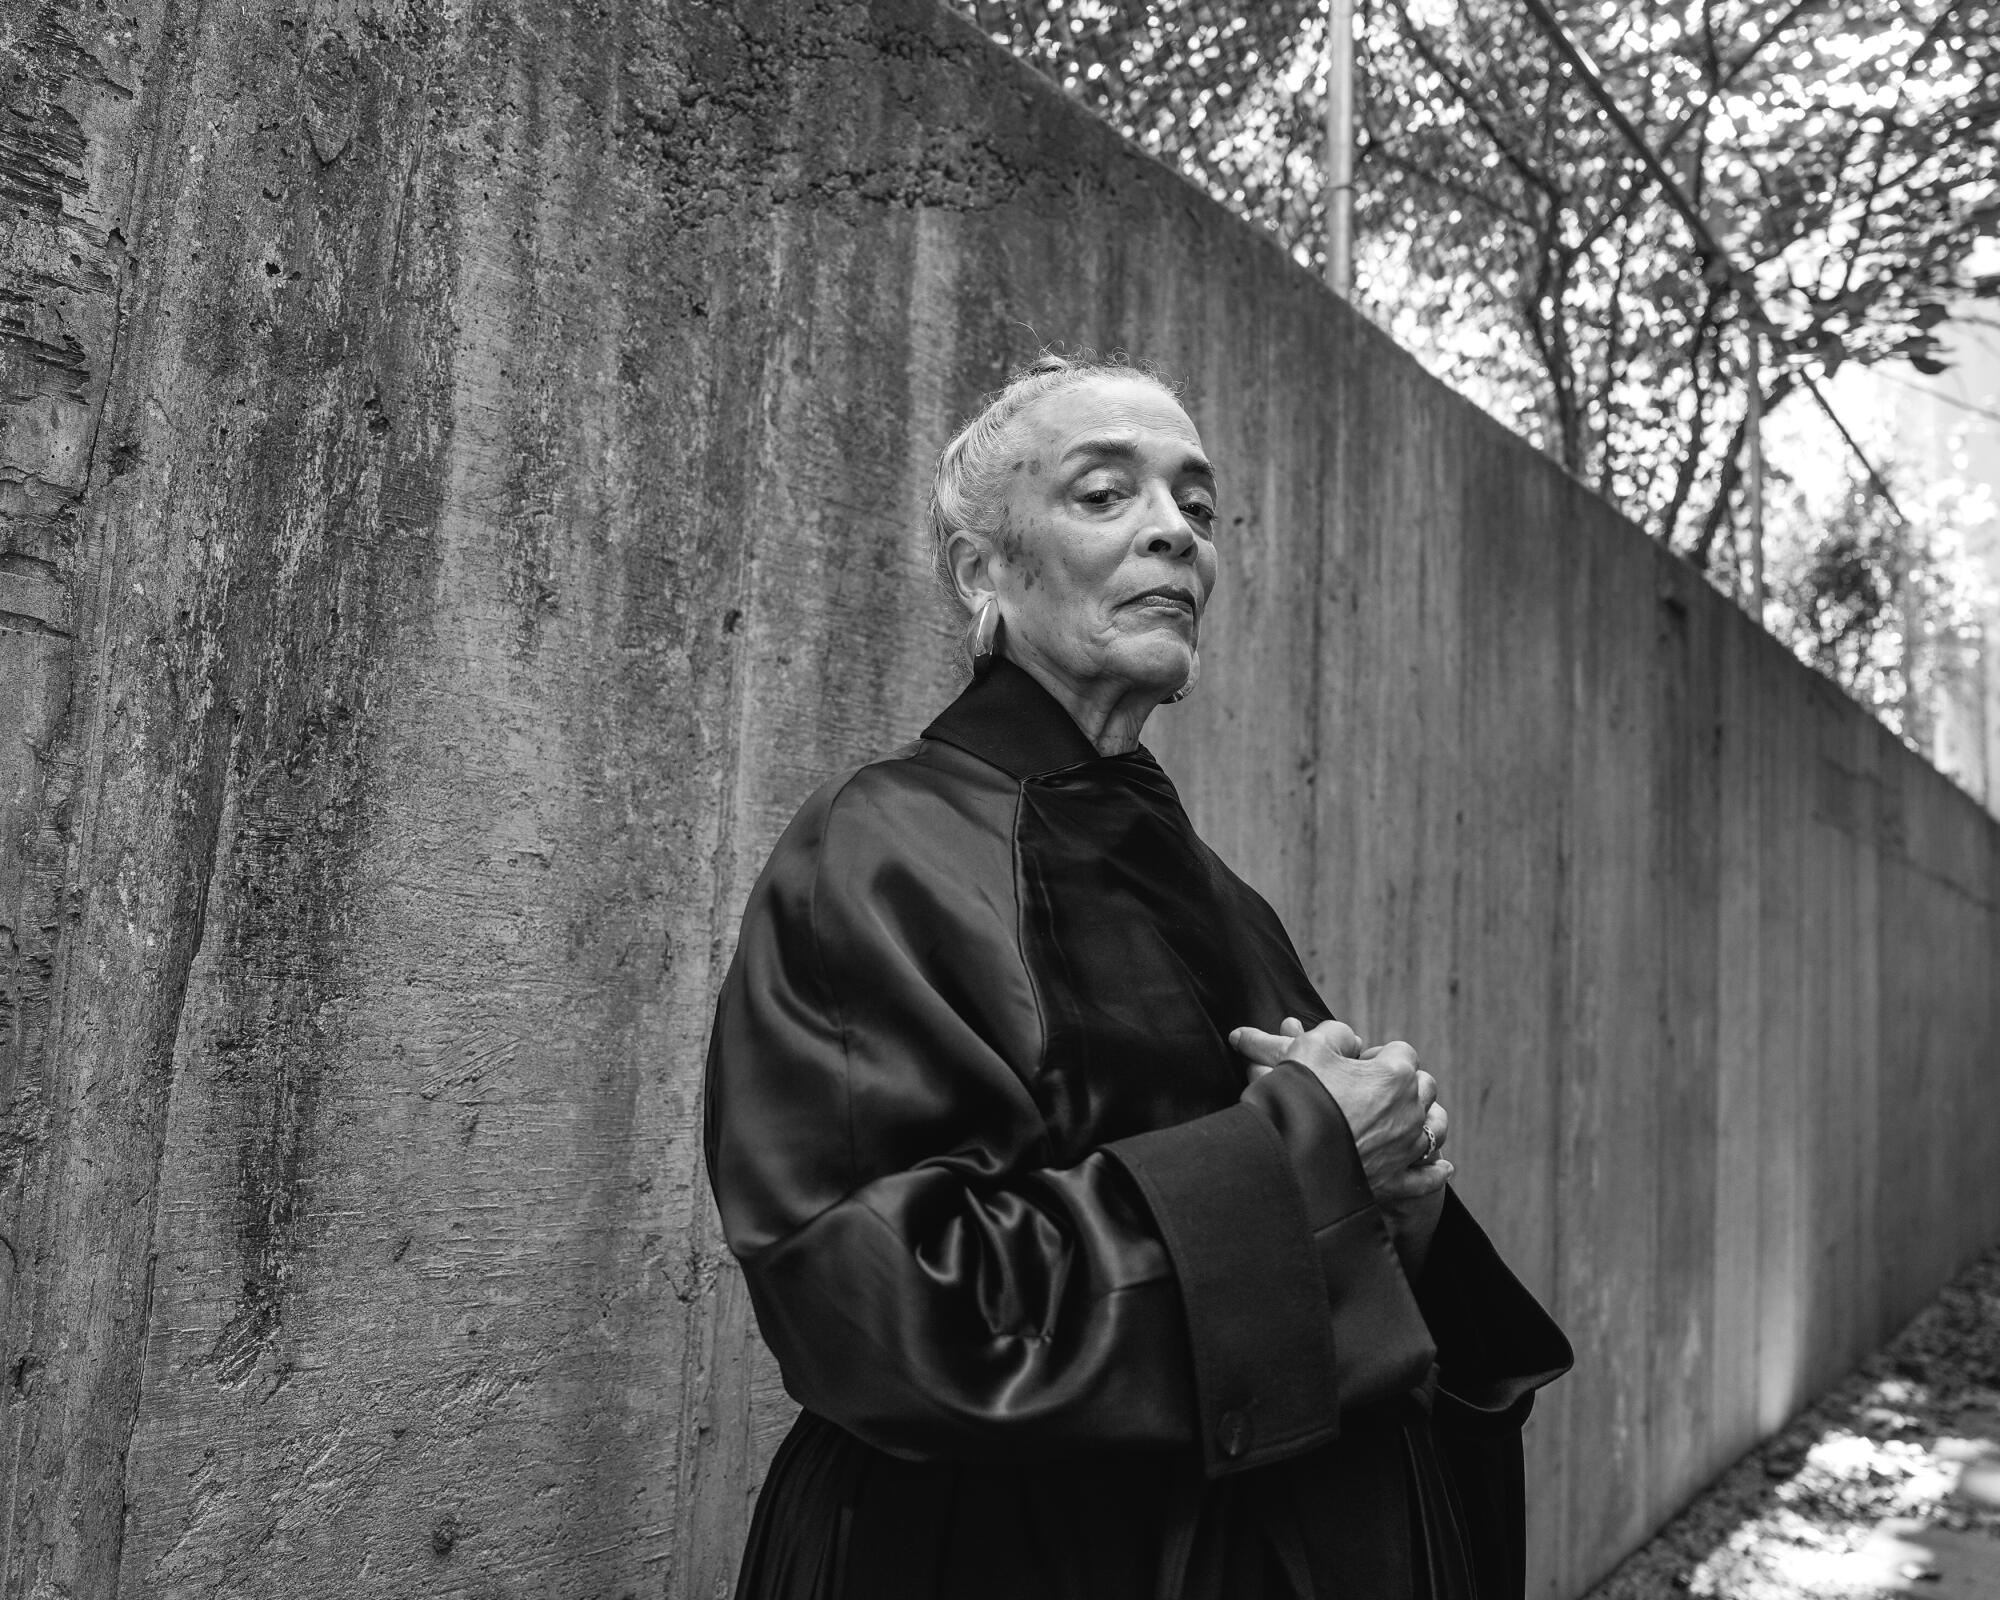 A black and white photo of a woman wearing a black robe beside an outdoor concrete wall.